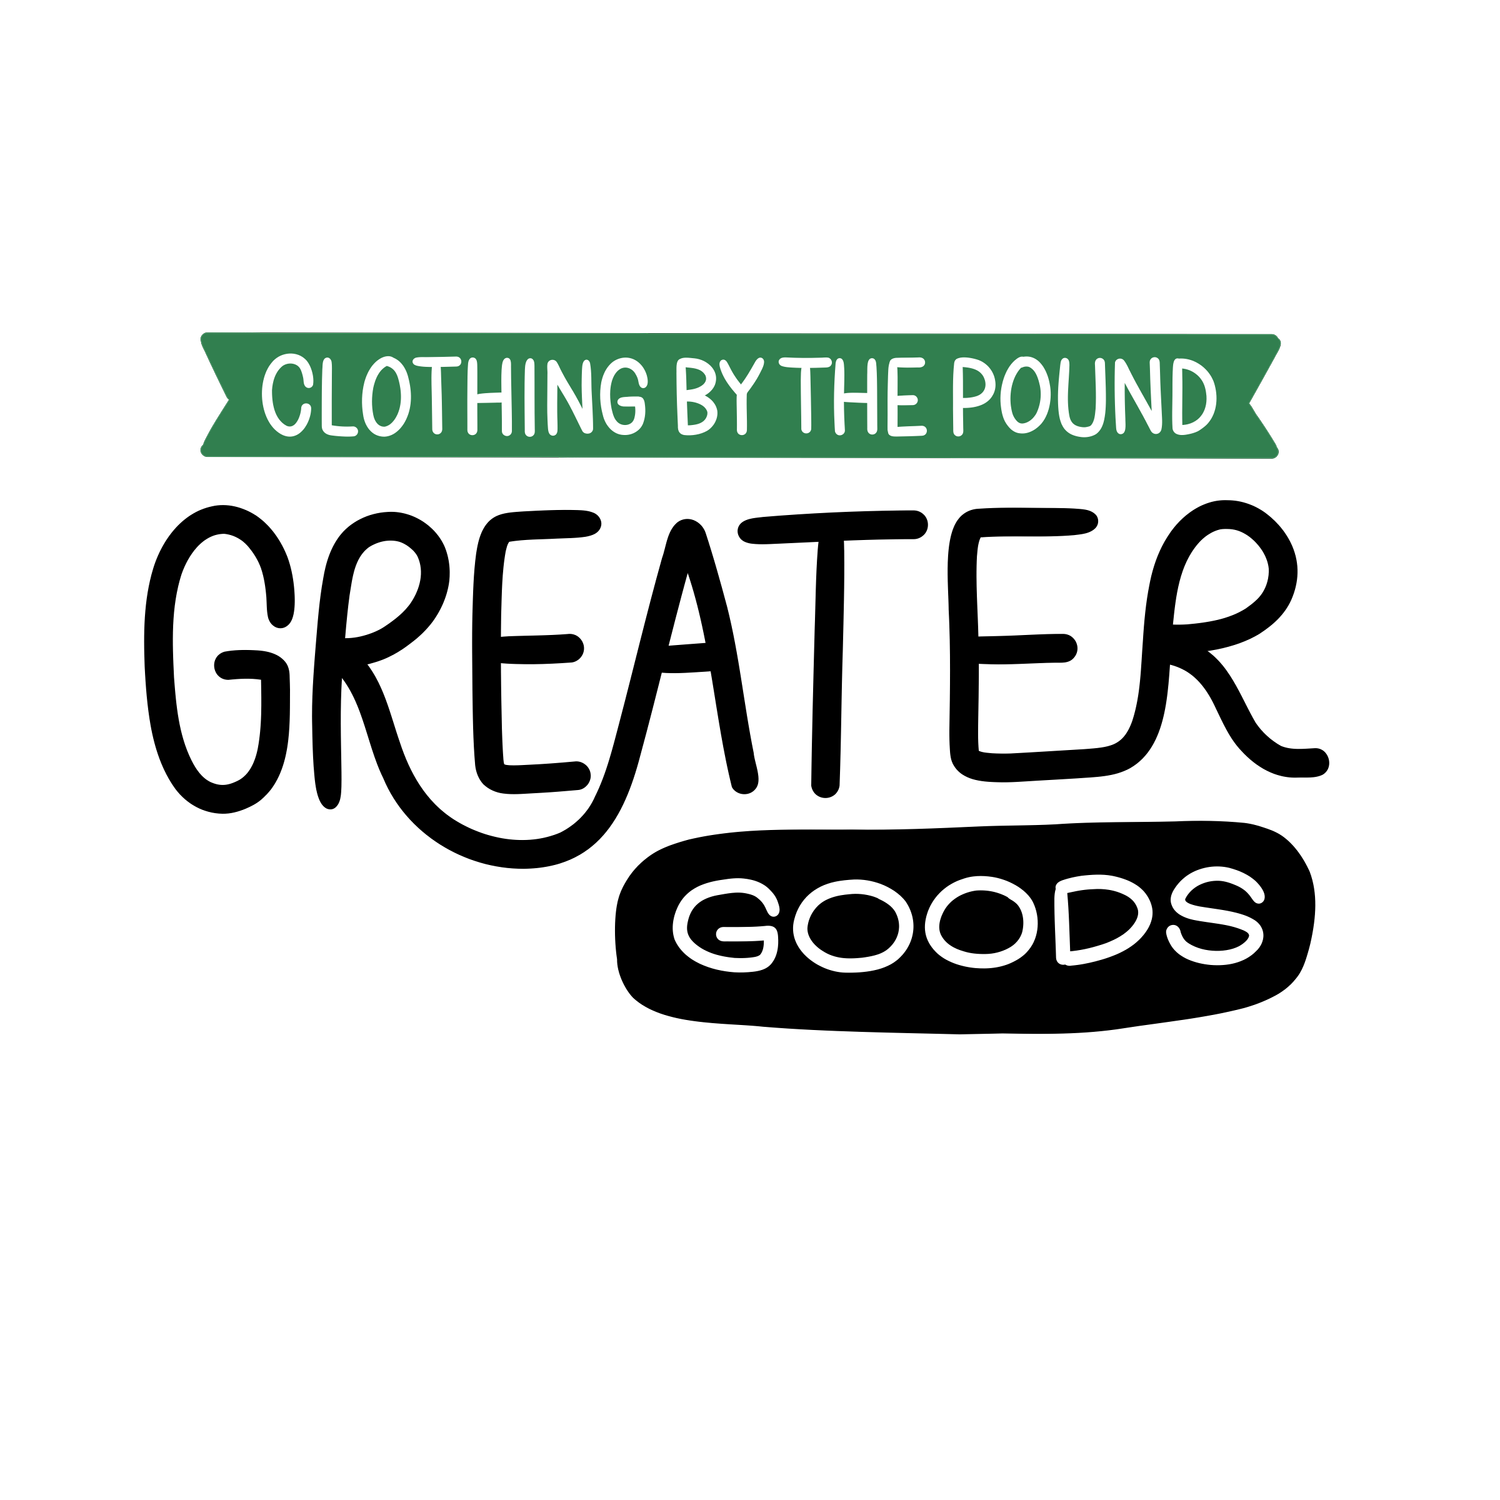 Greater Goods clothing by the pound